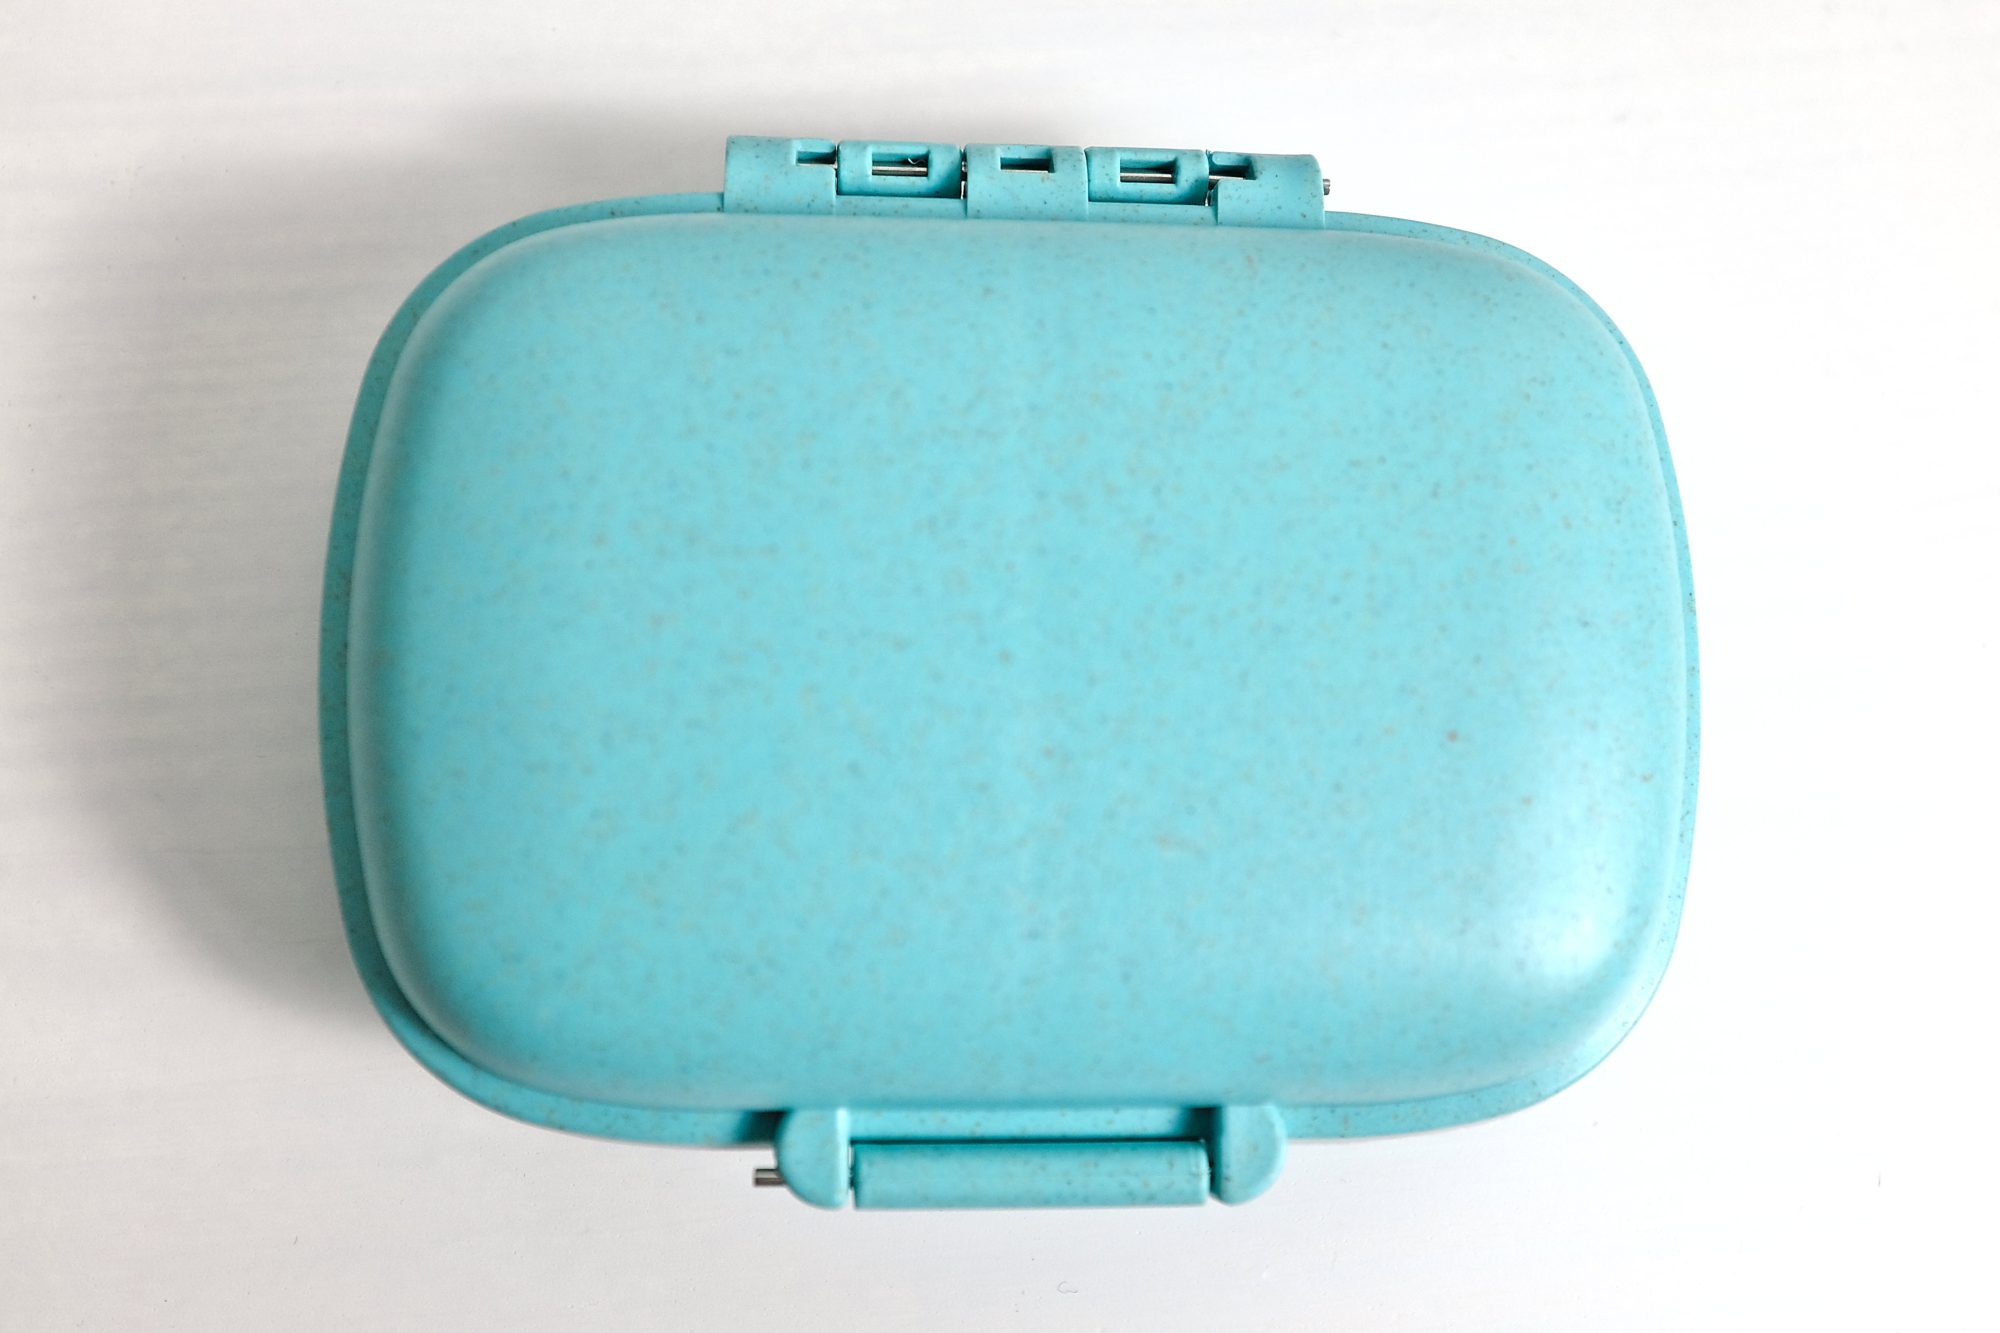 A blue pillbox with a latch